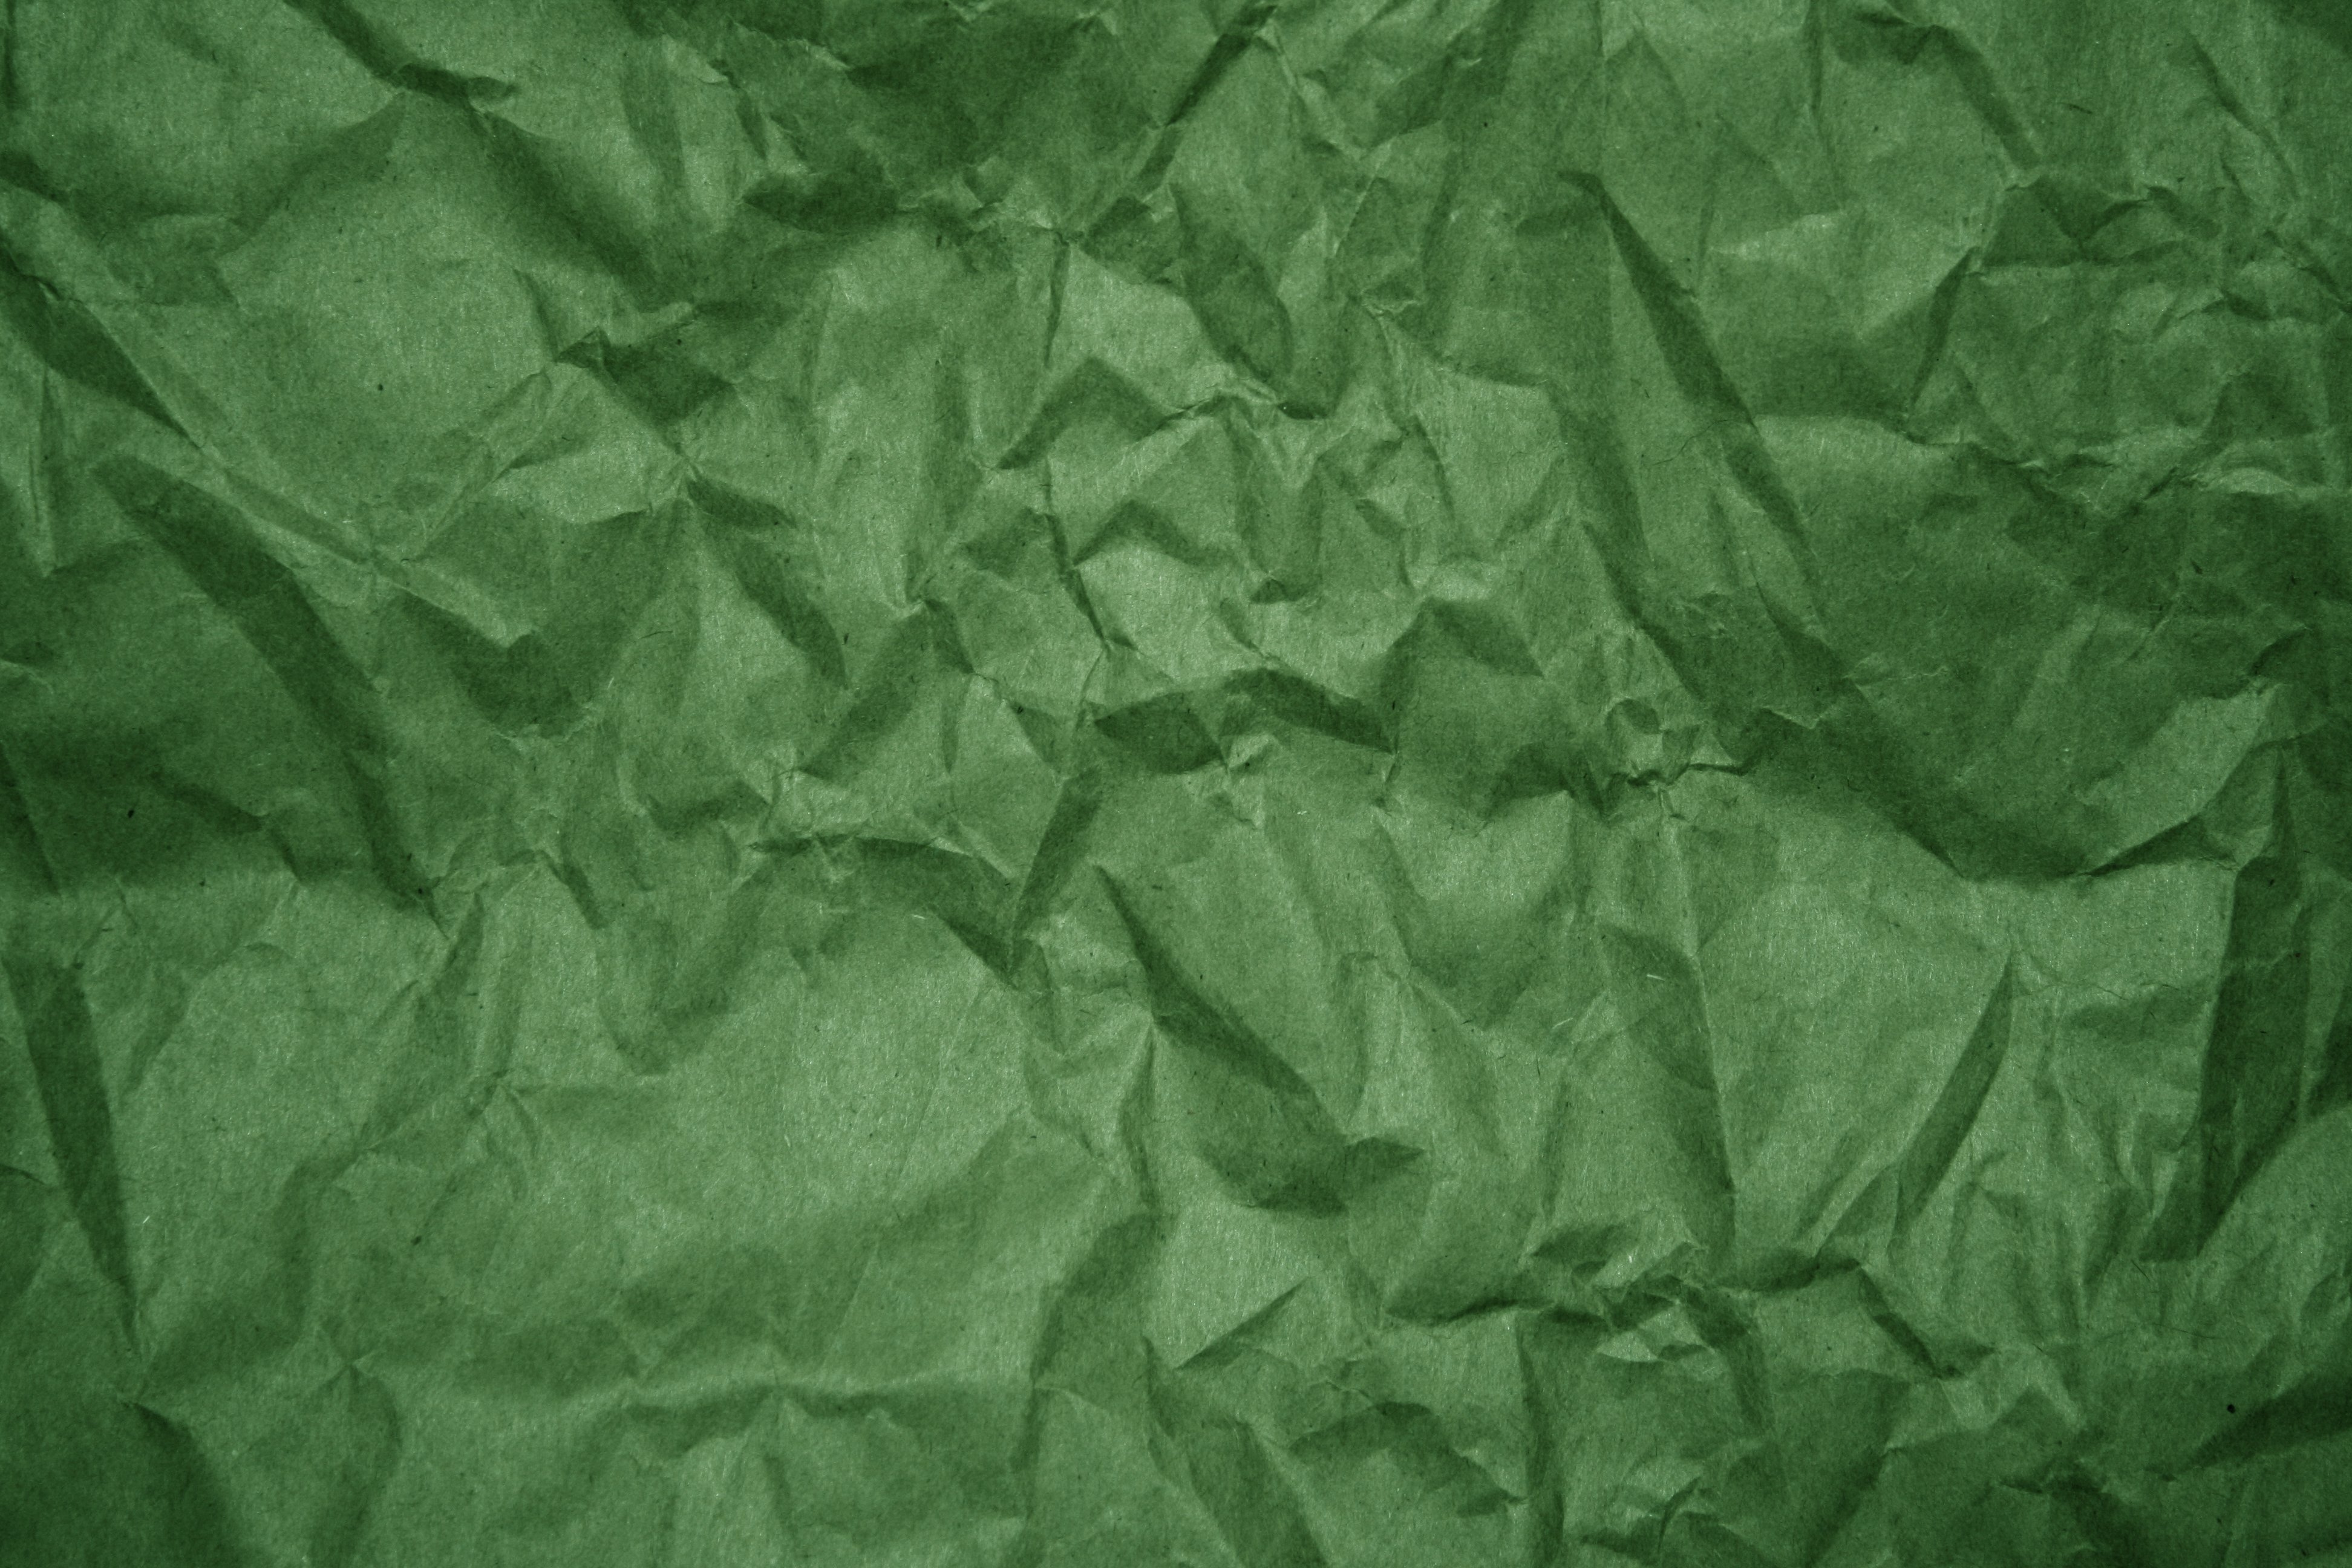 Green paper Stock Photos, Royalty Free Green paper Images